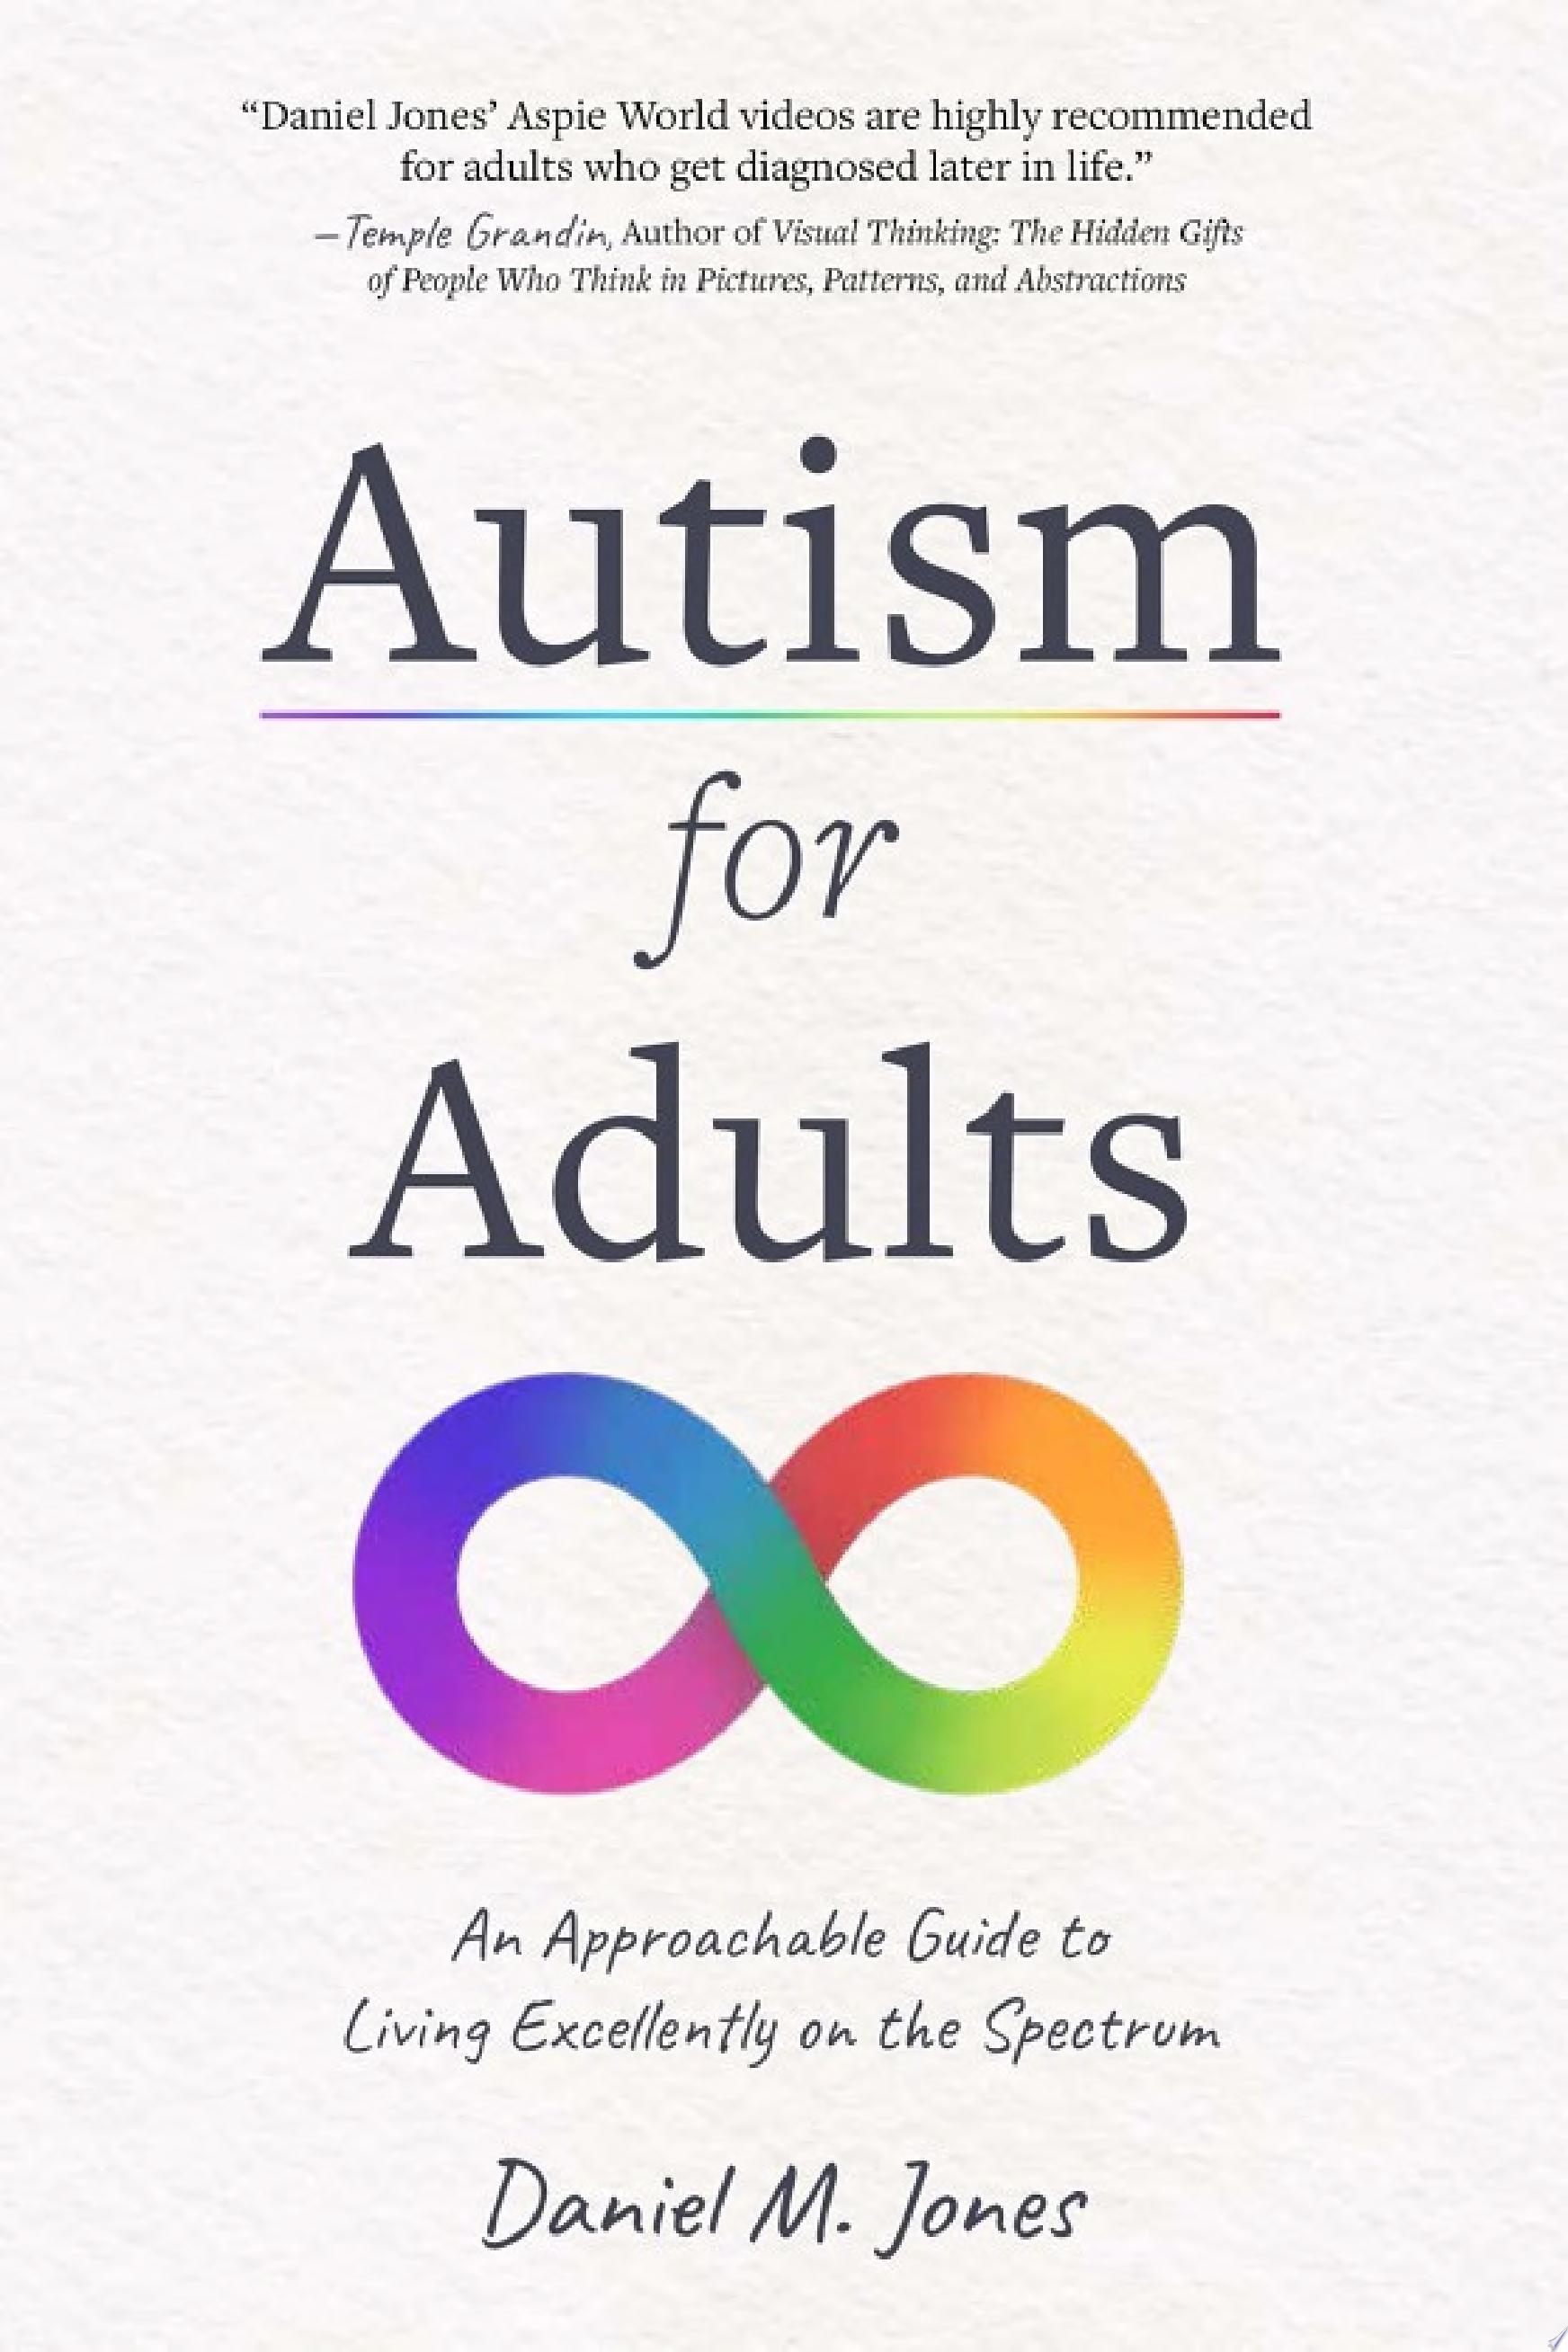 Image for "Autism for Adults"